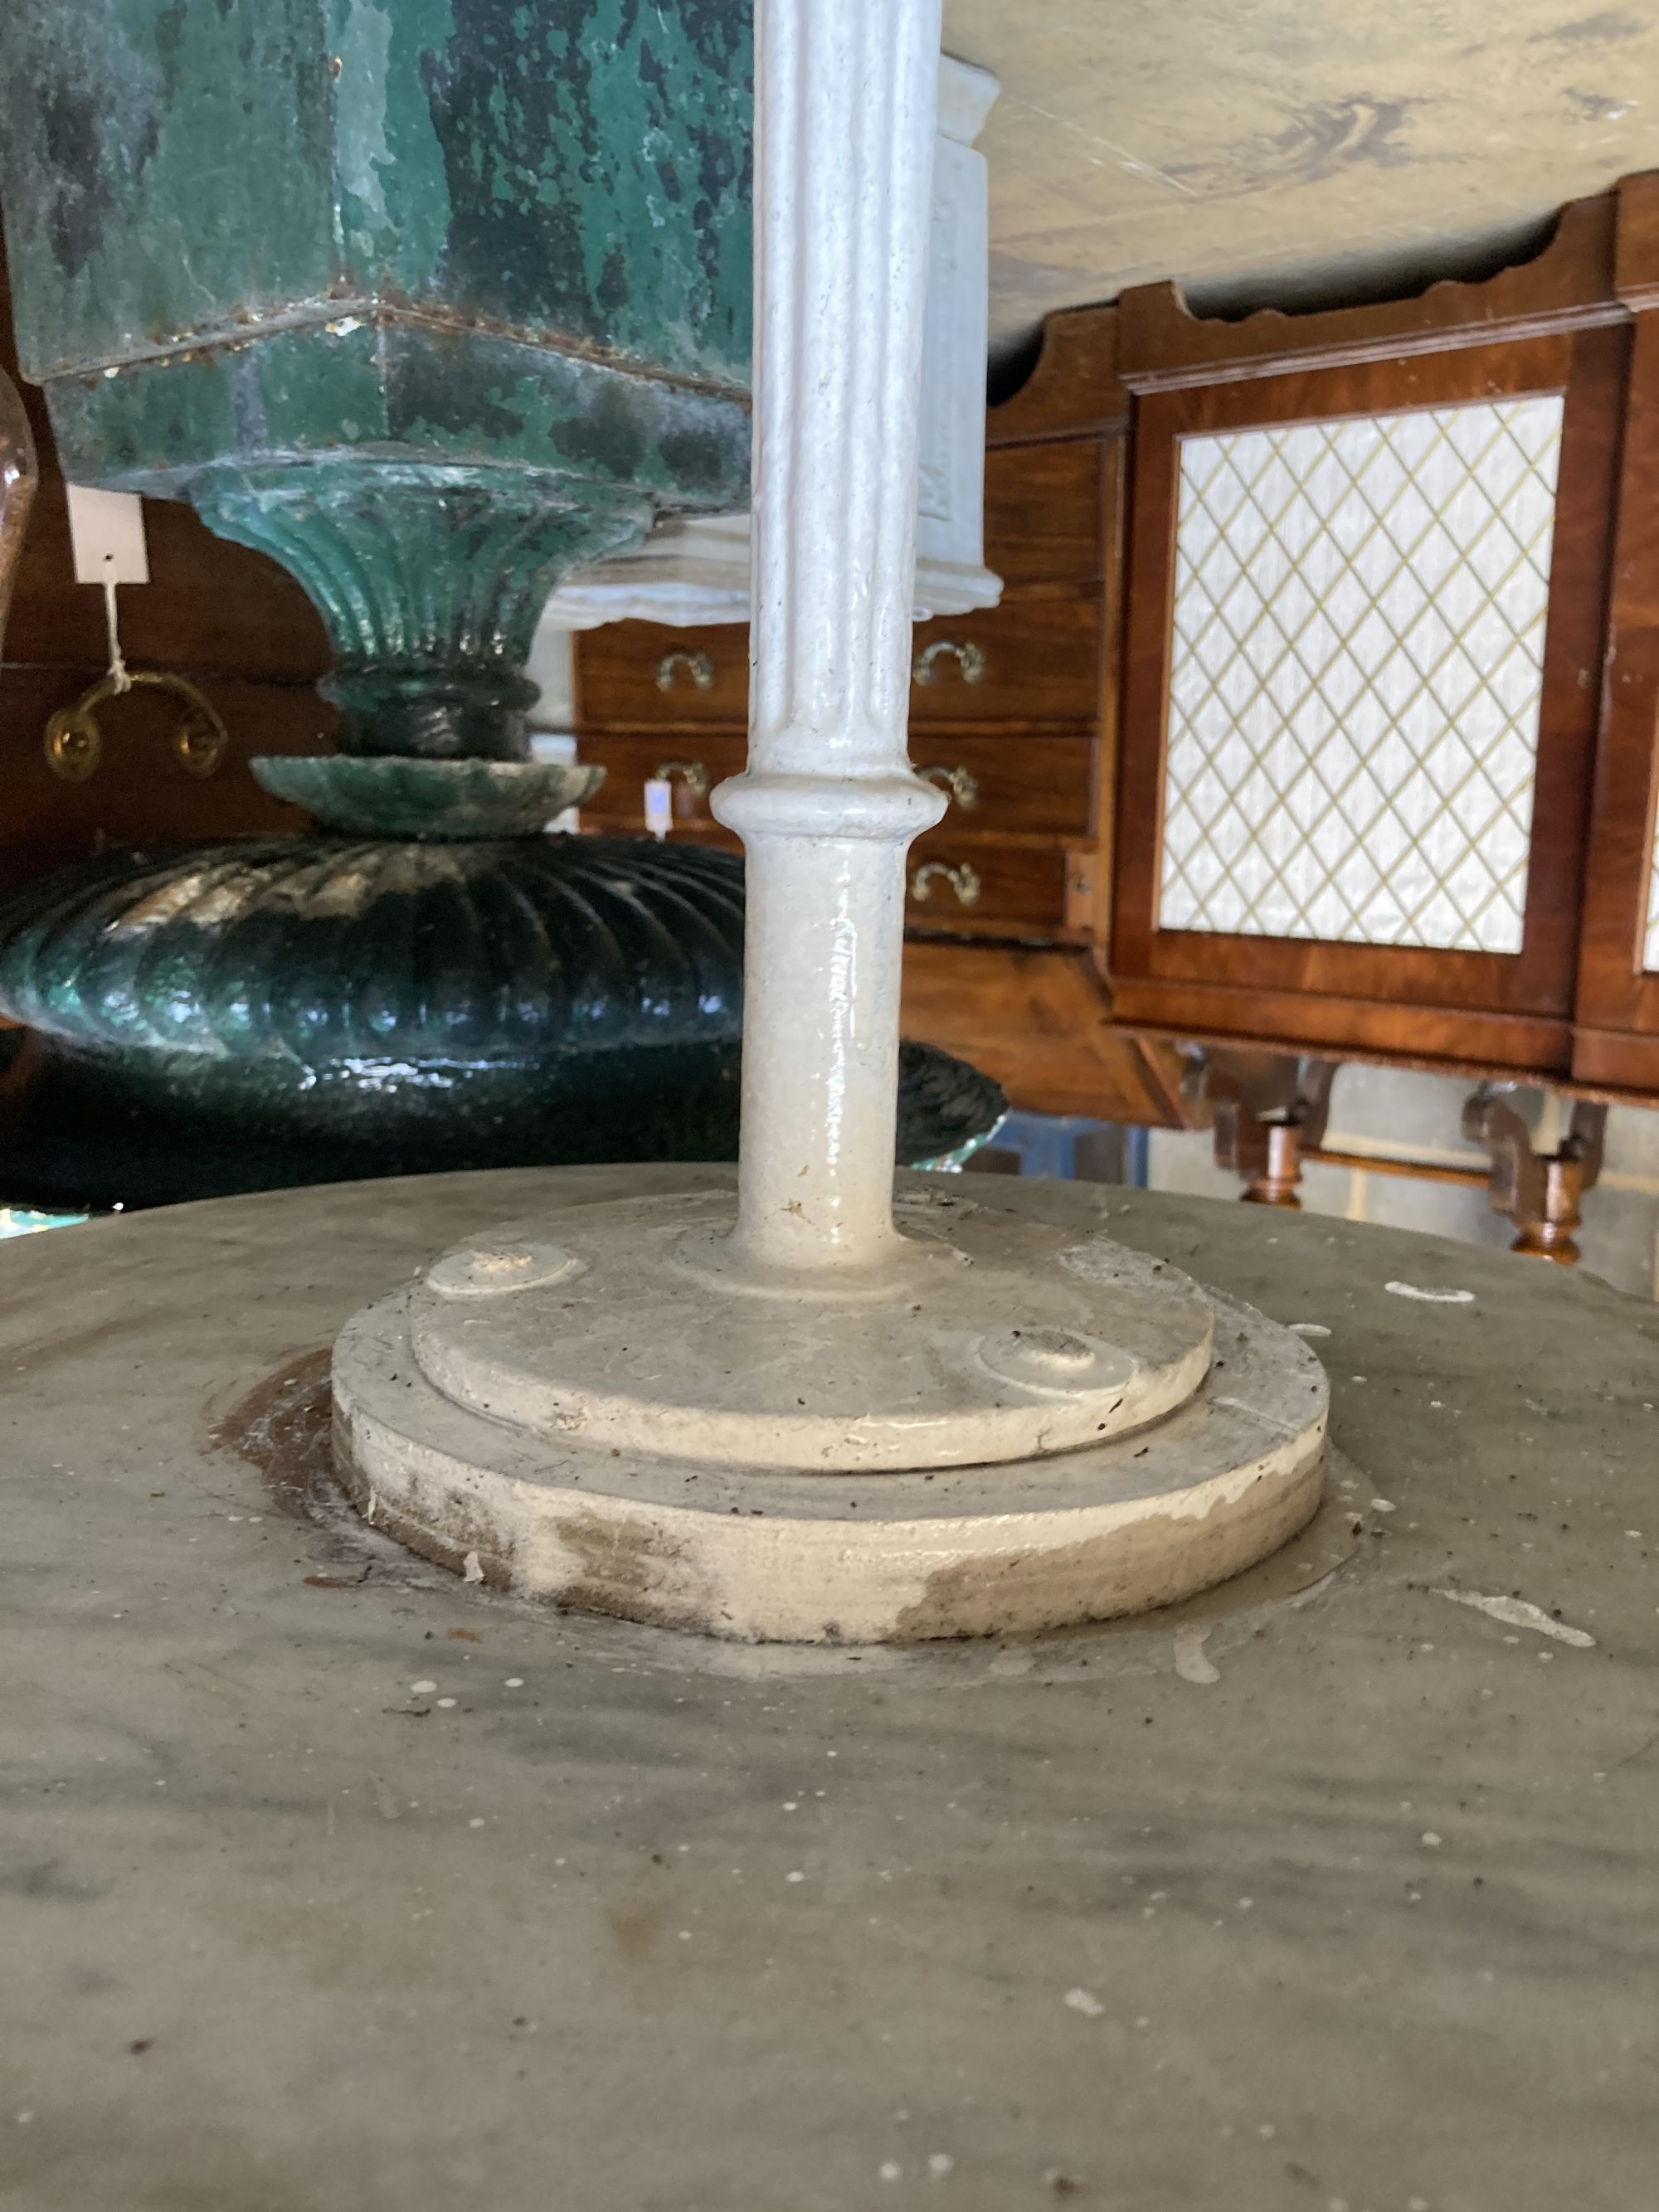 A Victorian marble topped cast iron garden table, diameter 50cm, height 72cm